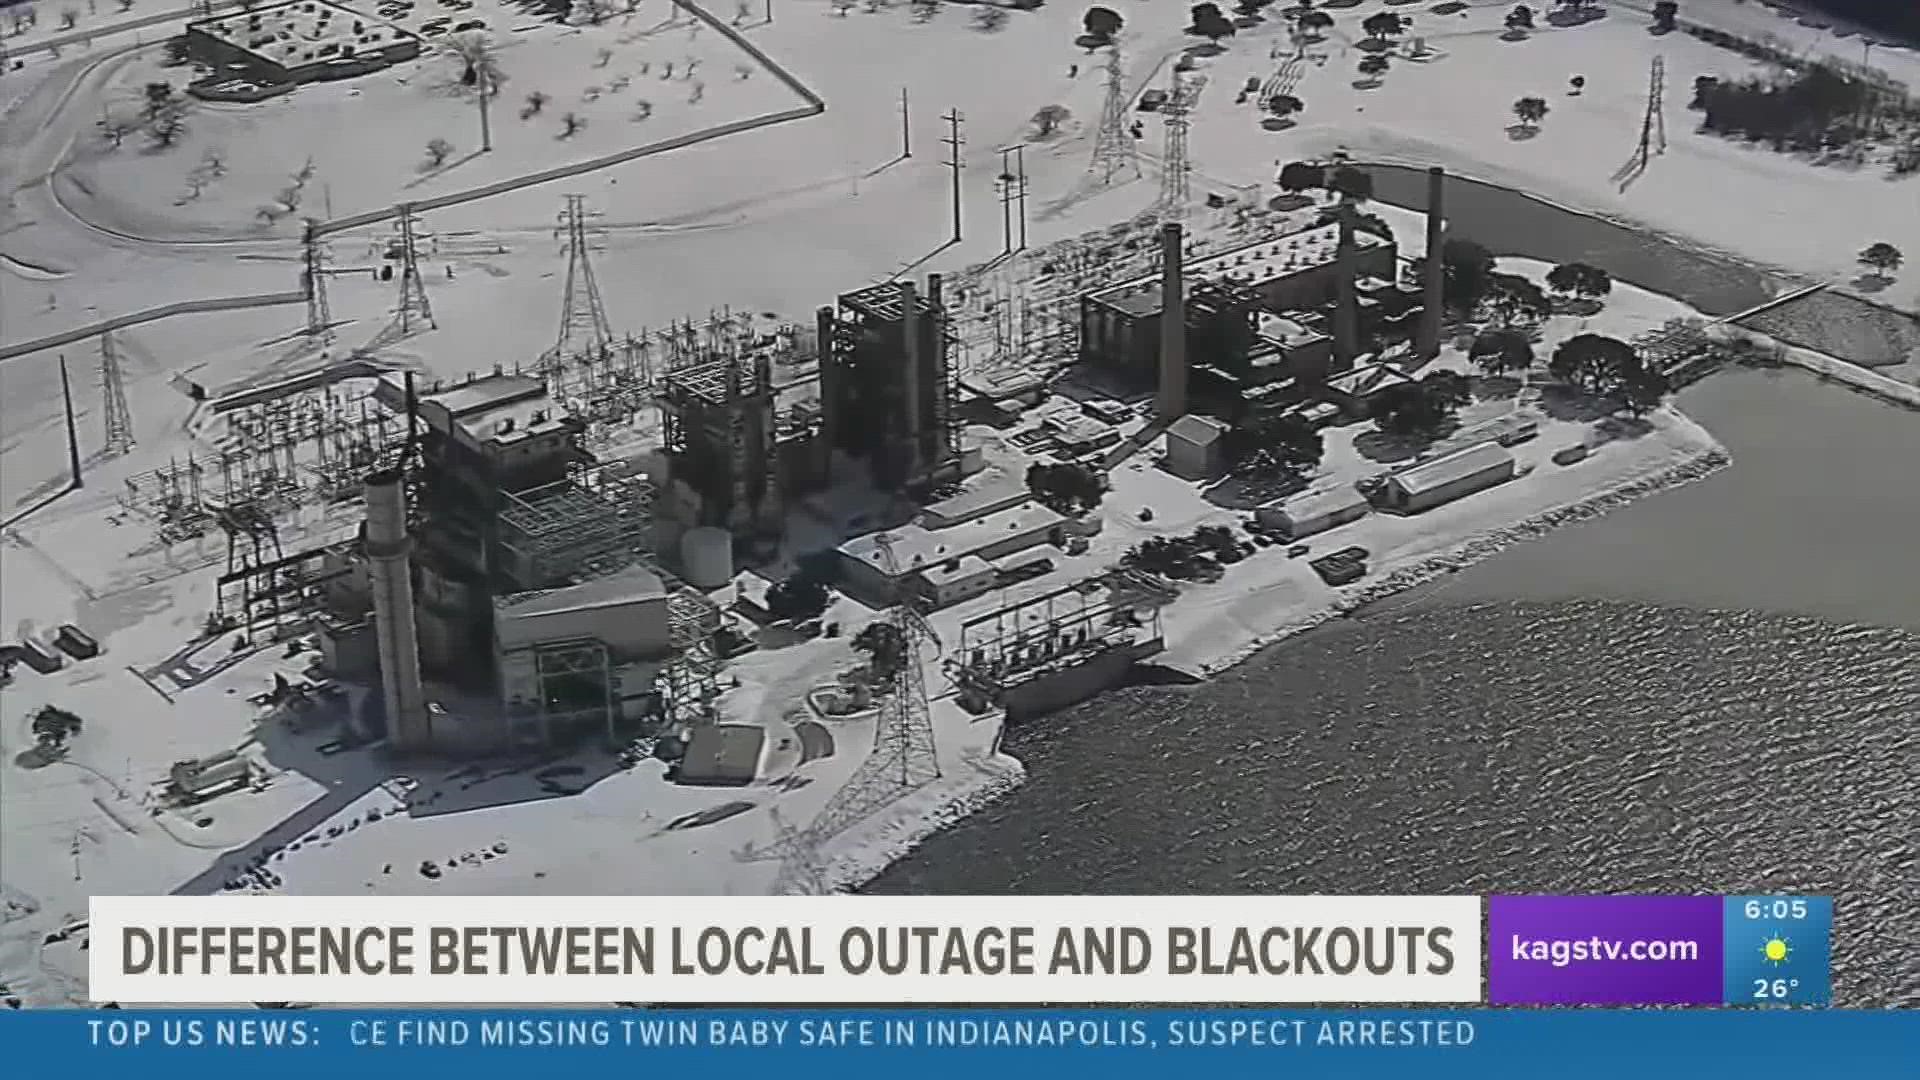 Rolling blackouts and local outages have very different causes and may last for different amounts of time.